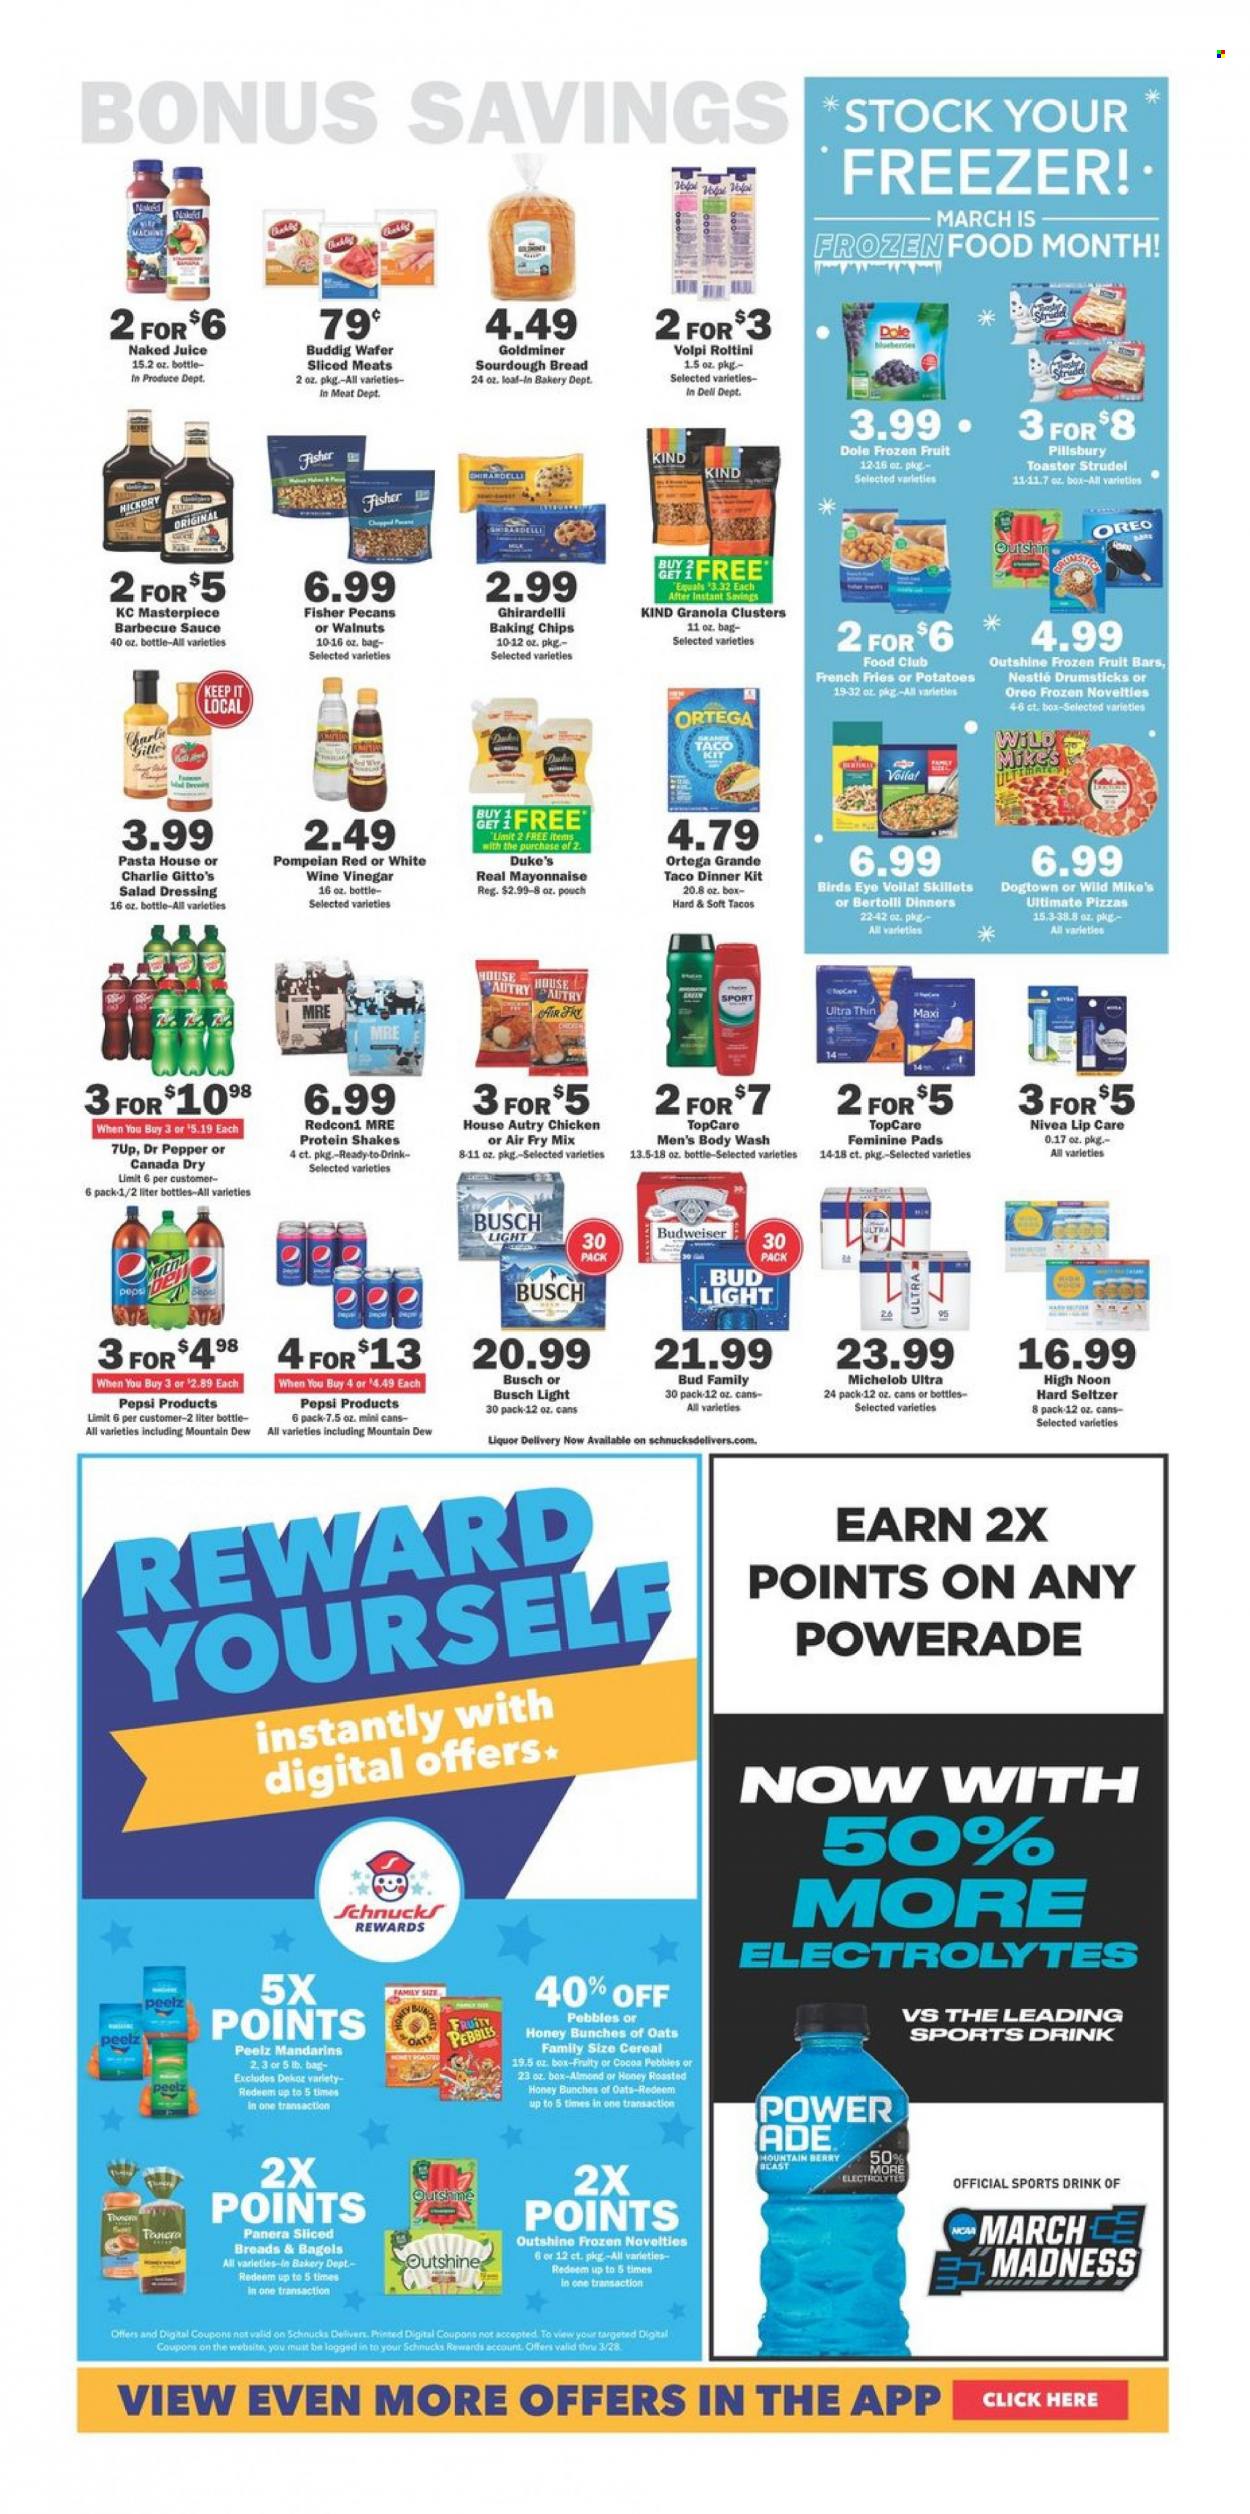 thumbnail - Schnucks Flyer - 03/22/2023 - 03/28/2023 - Sales products - bagels, bread, strudel, sourdough bread, tacos, potatoes, Dole, blueberries, mandarines, pizza, pasta, sauce, Pillsbury, Bird's Eye, dinner kit, Bertolli, Oreo, protein drink, shake, mayonnaise, ice cream bars, potato fries, french fries, Nestlé, wafers, Ghirardelli, baking chips, cereals, granola, Fruity Pebbles, BBQ sauce, salad dressing, dressing, wine vinegar, walnuts, pecans, Canada Dry, Mountain Dew, Powerade, Pepsi, juice, Dr. Pepper, 7UP, Hard Seltzer, beer, Busch, Bud Light, chicken, Nivea, Rin, sanitary pads, Budweiser, Michelob. Page 5.